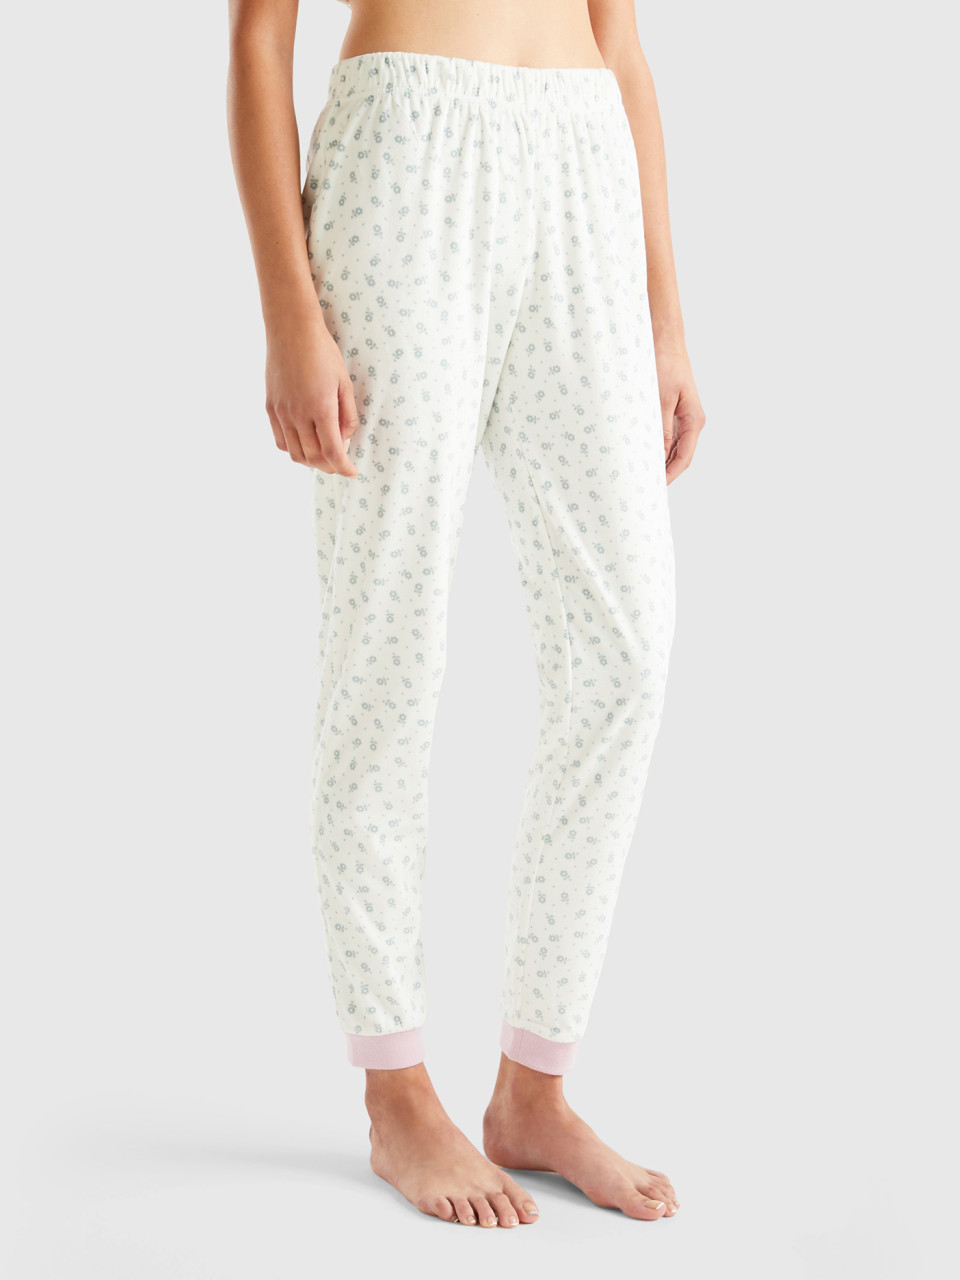 Benetton, Slim Fit Floral Trousers, White, Women